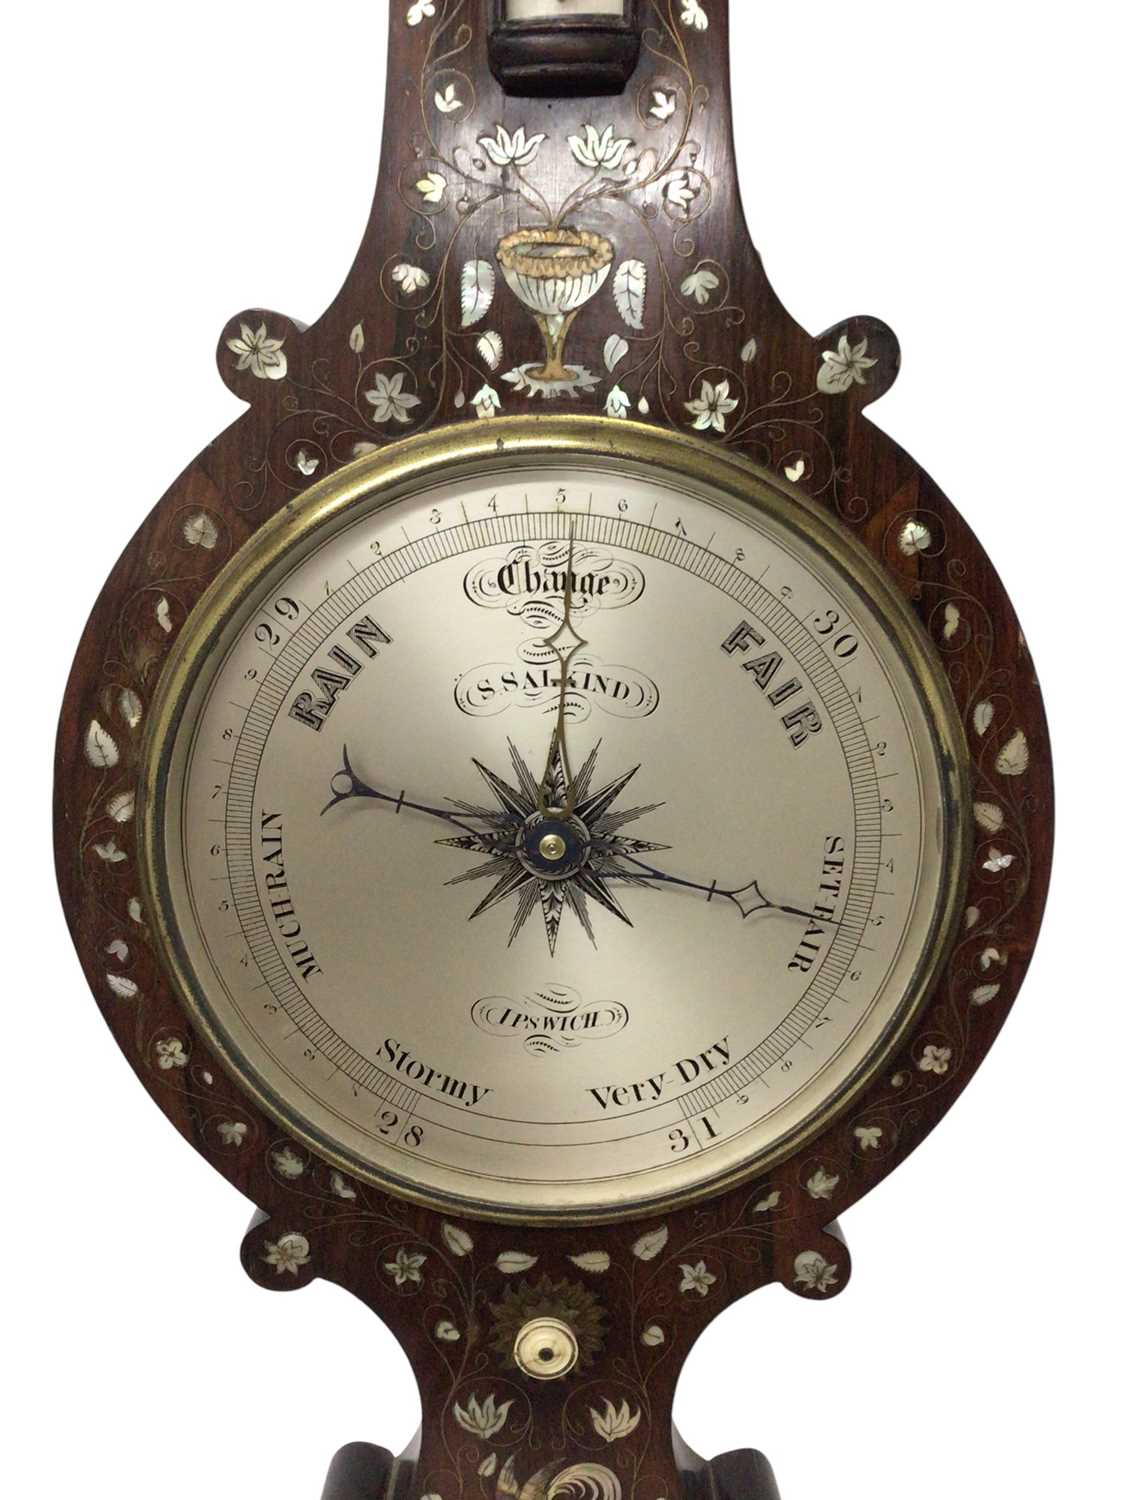 Early Victorian rosewood and mother of pearl inlaid barometer, signed S. Salkind, Ipswich - Image 2 of 7